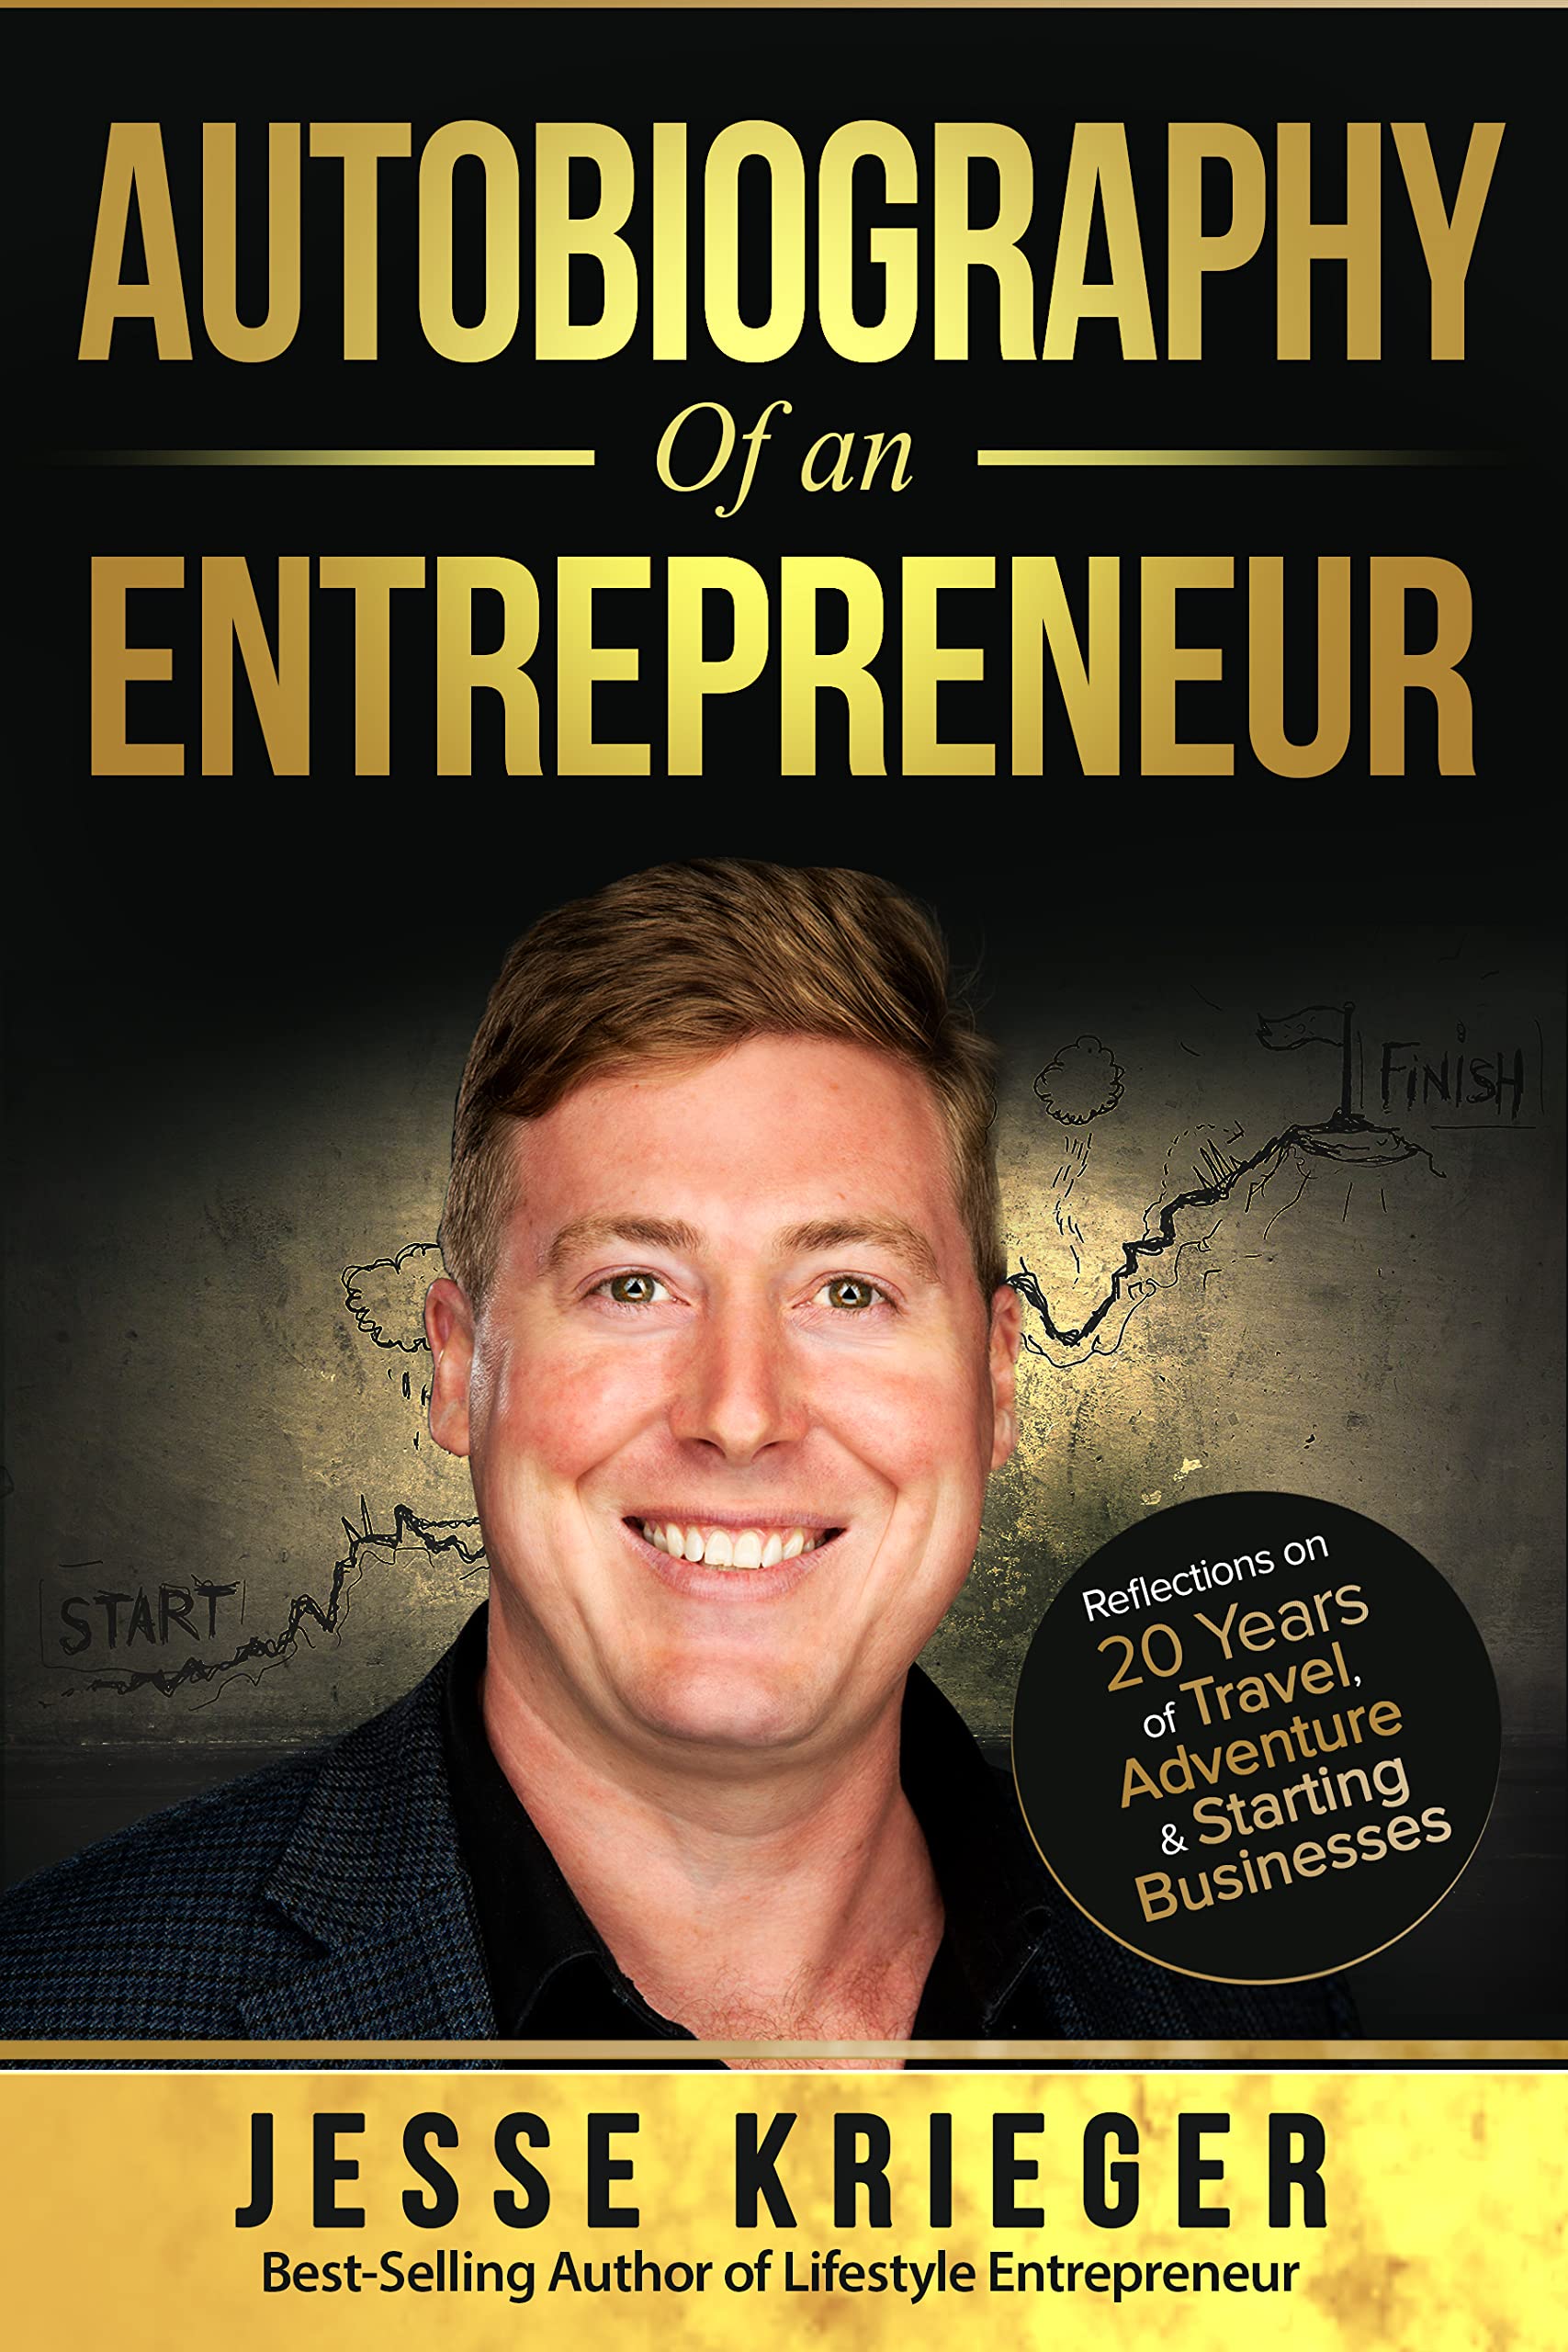 Autobiography of an Entrepreneur: Reflections on 20 Years of Travel, Adventure & Starting Businesses